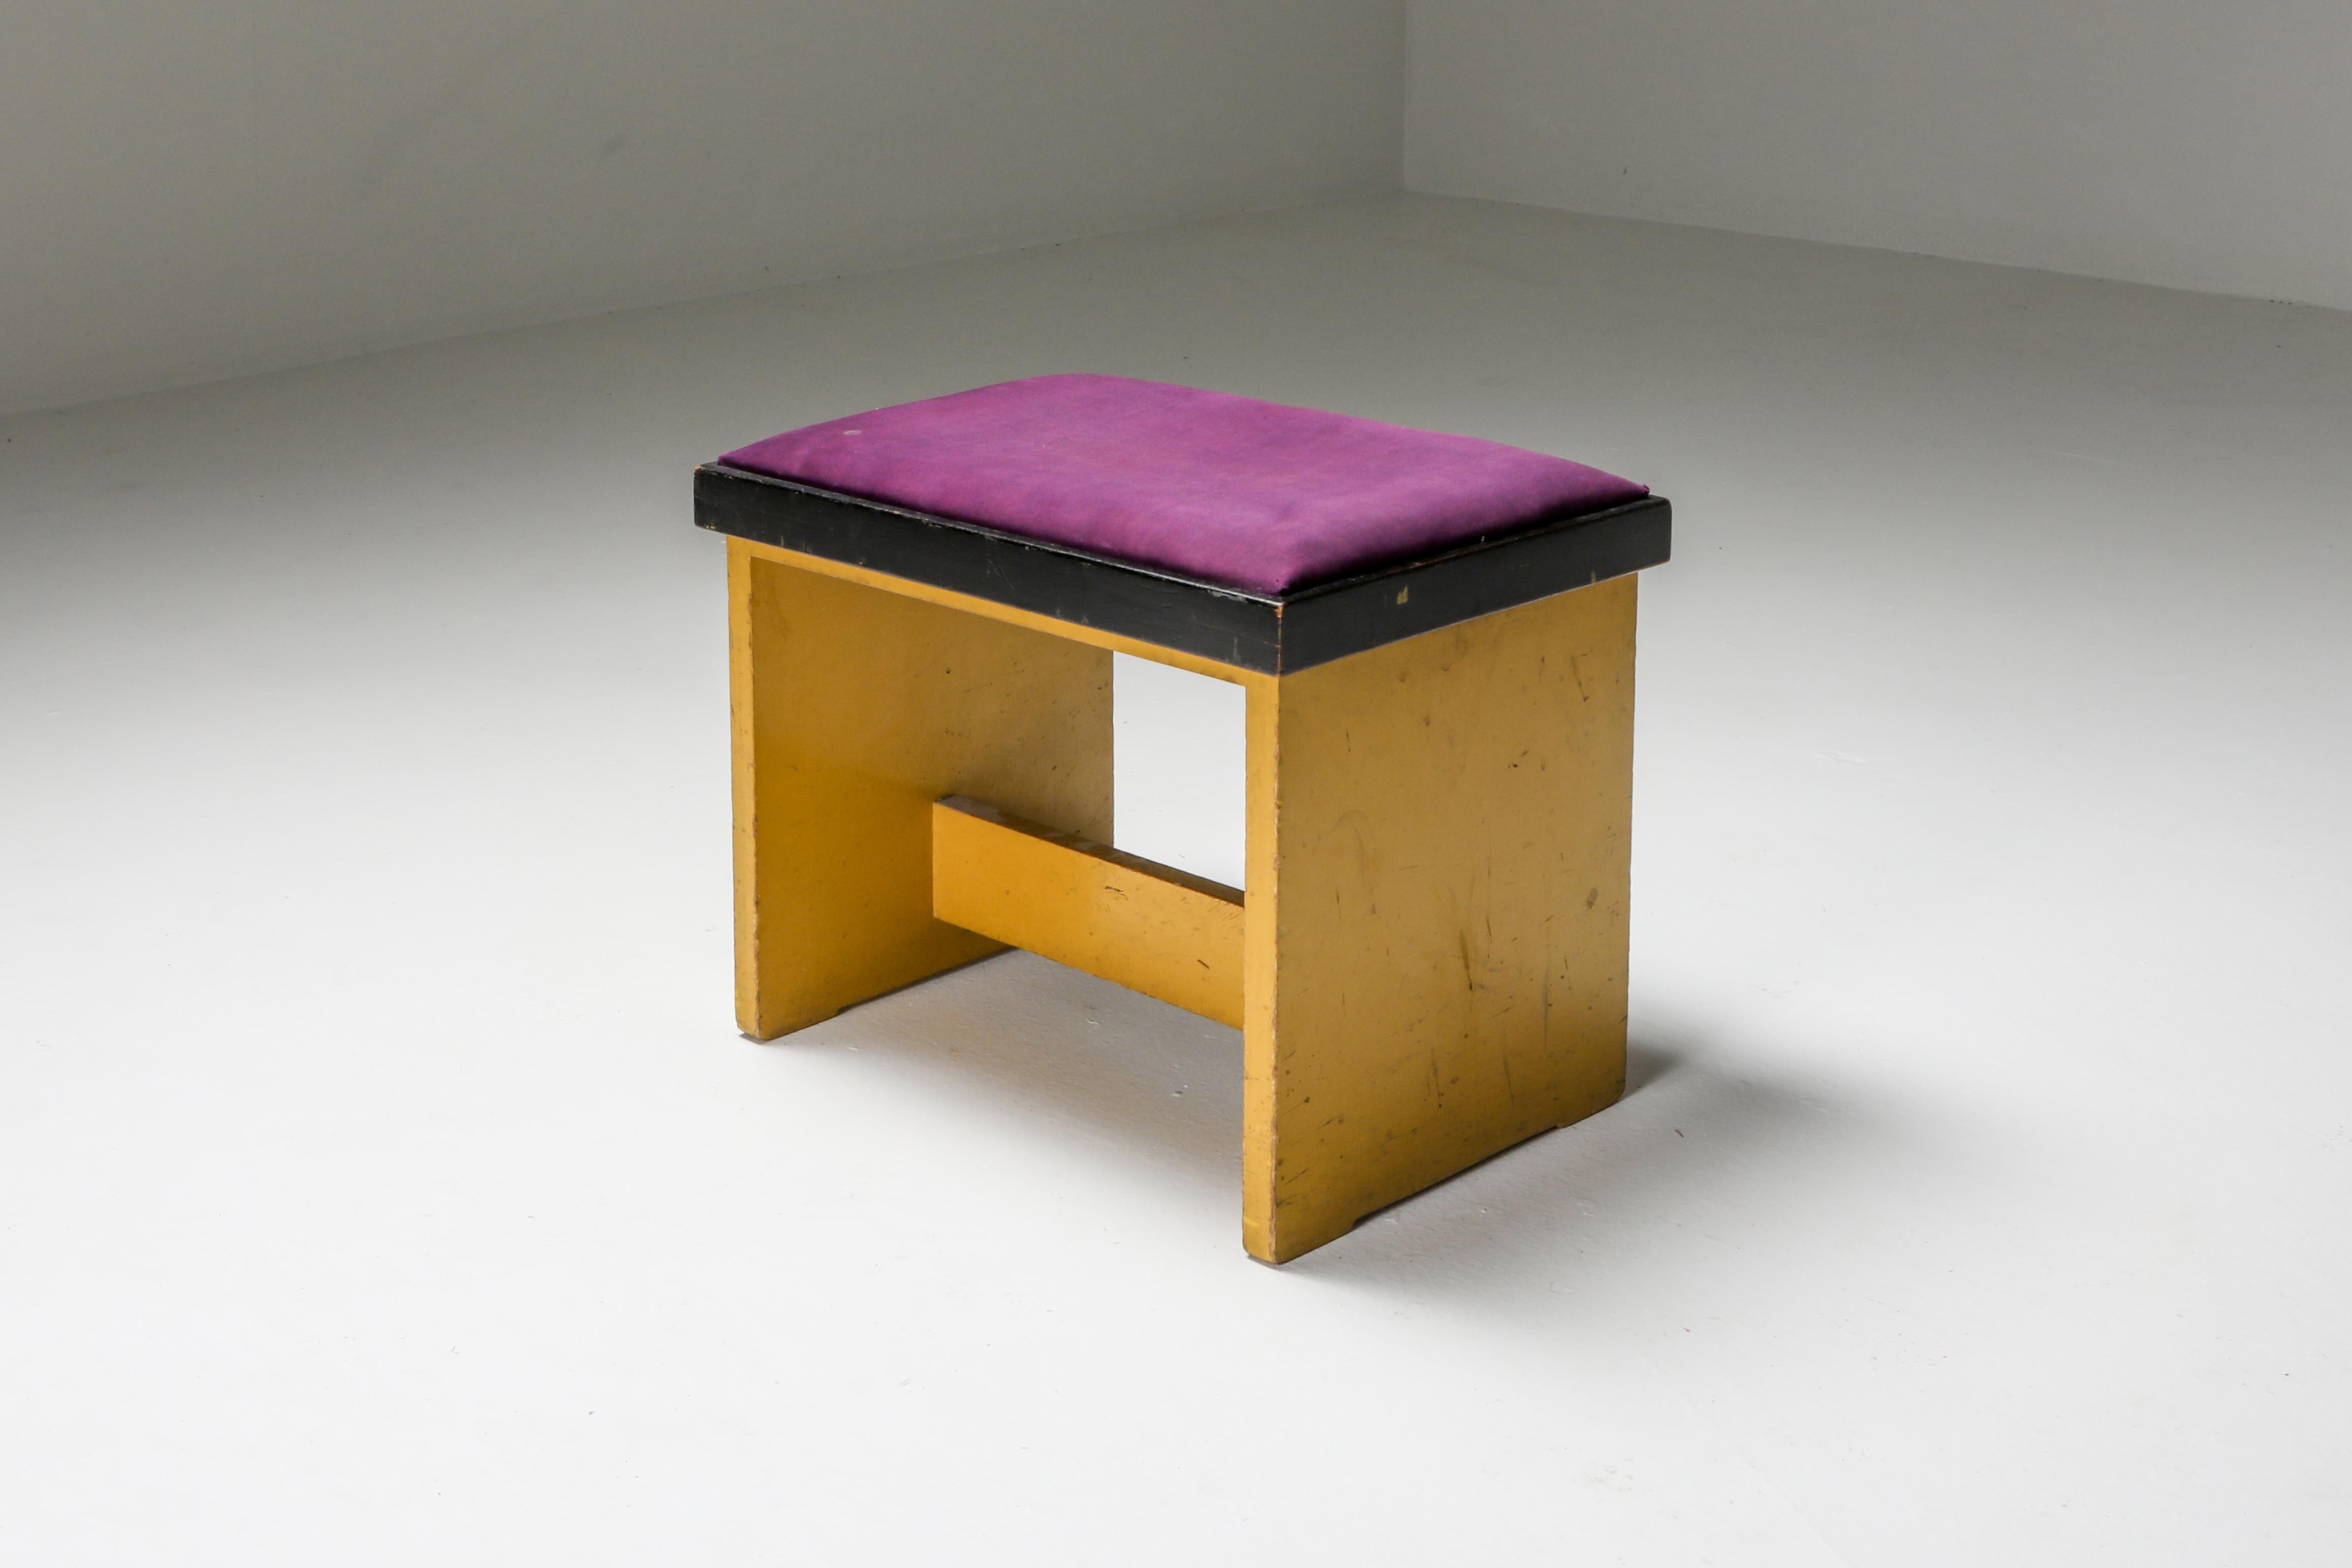 Early 20th Century Modernist Stool by H. Wouda, 1924 For Sale